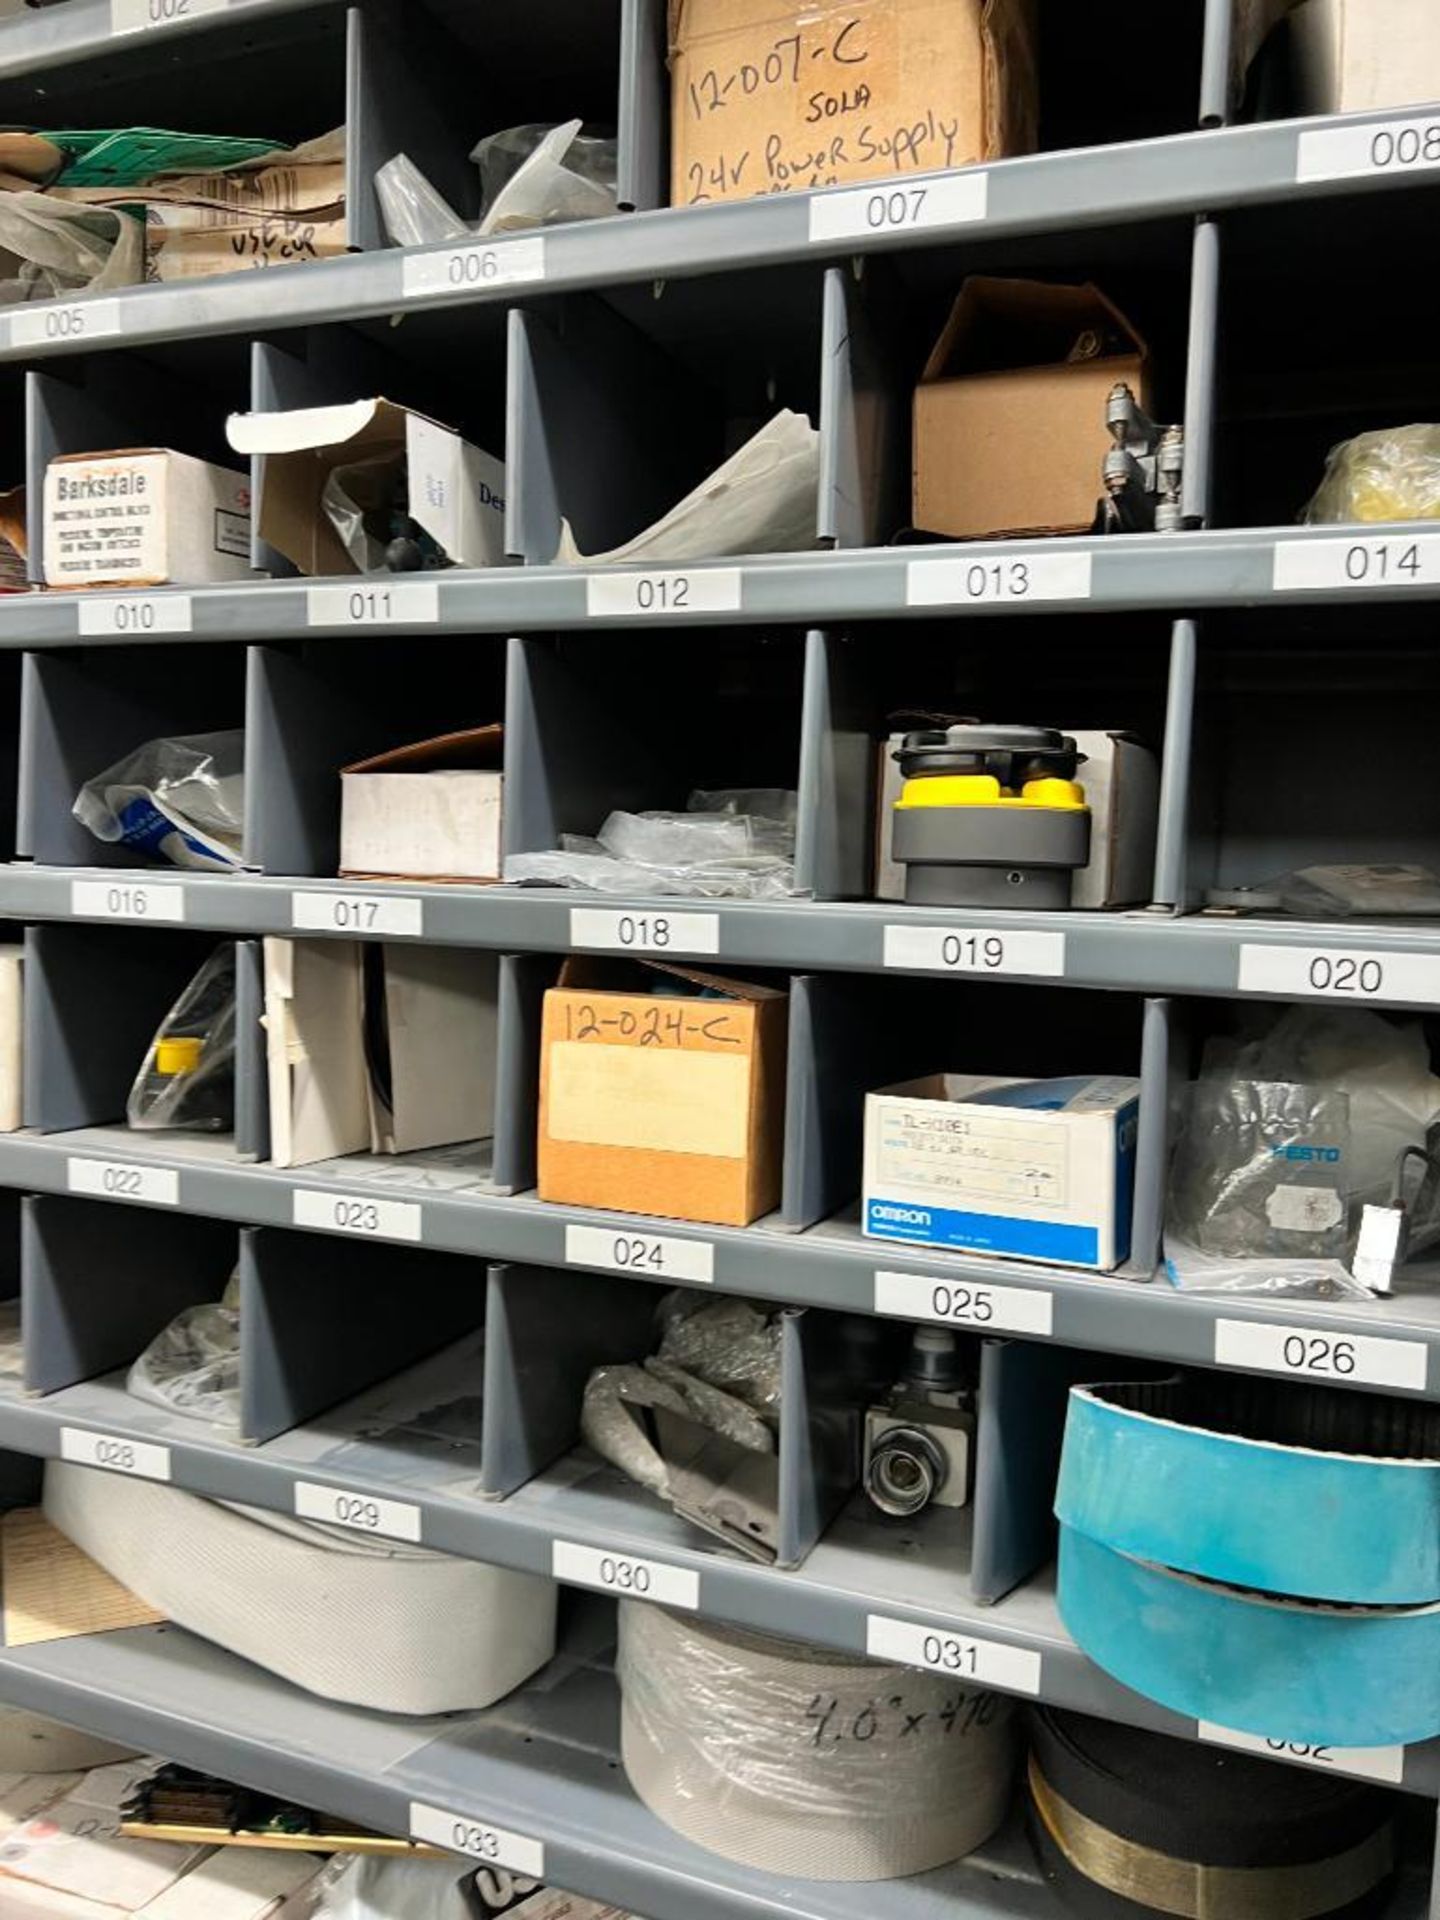 (28) Shelves of Assorted Parts, VERY LARGE LOT Consisting of MRO, Drives, Valves, PLC, Nuts, Bolts, - Image 25 of 67